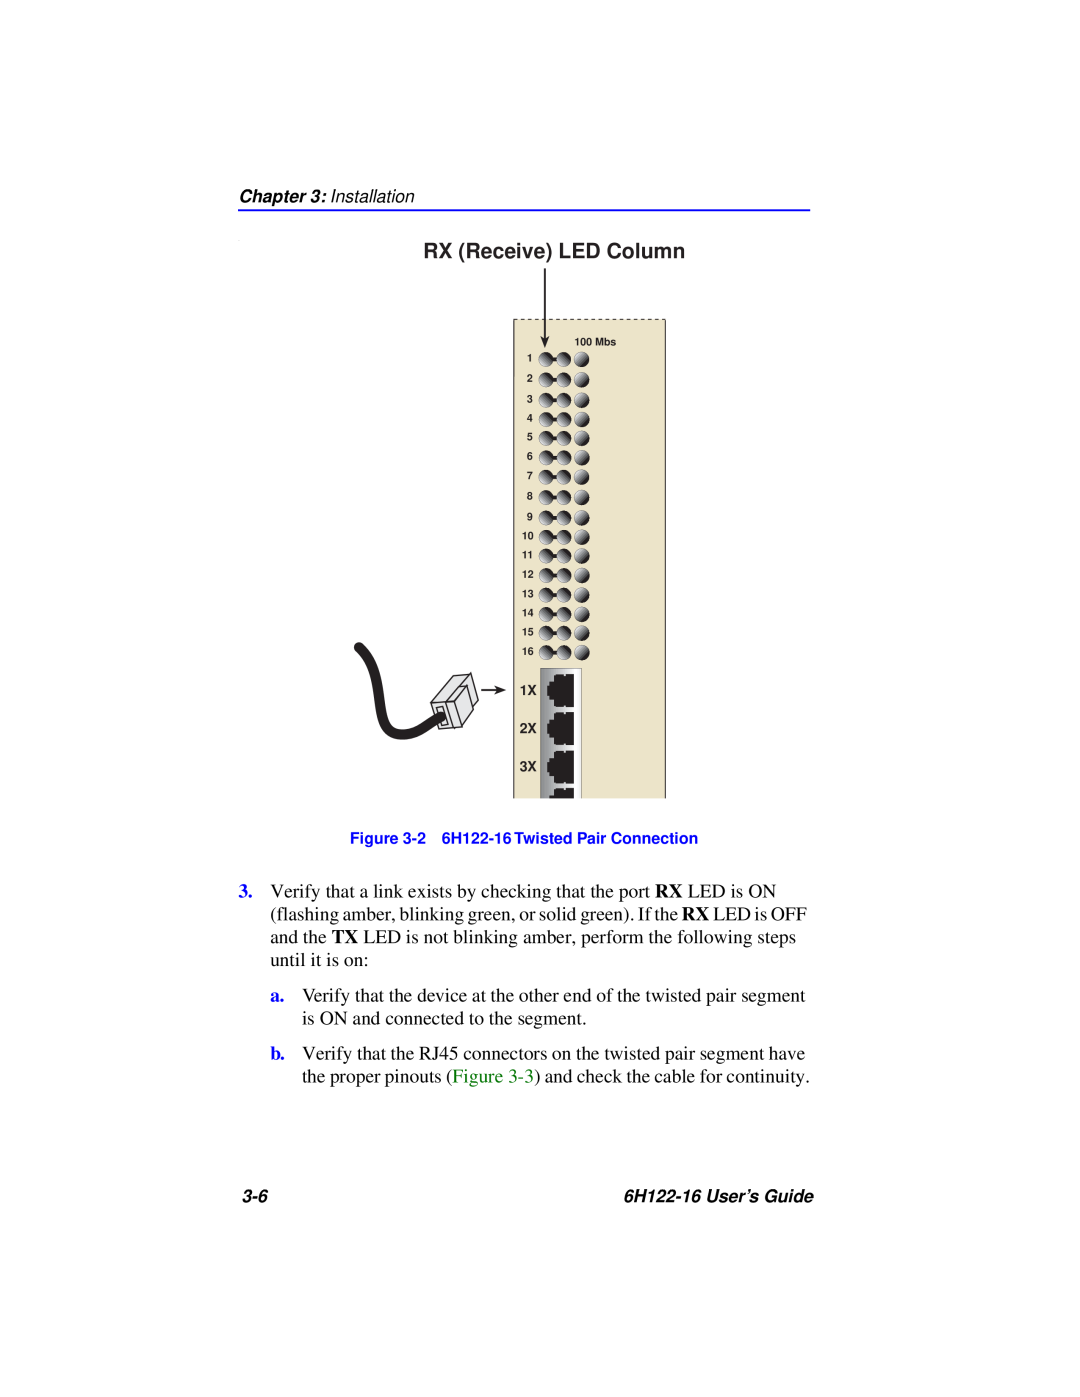 Cabletron Systems manual RX Receive LED Column, 2 6H122-16 Twisted Pair Connection 